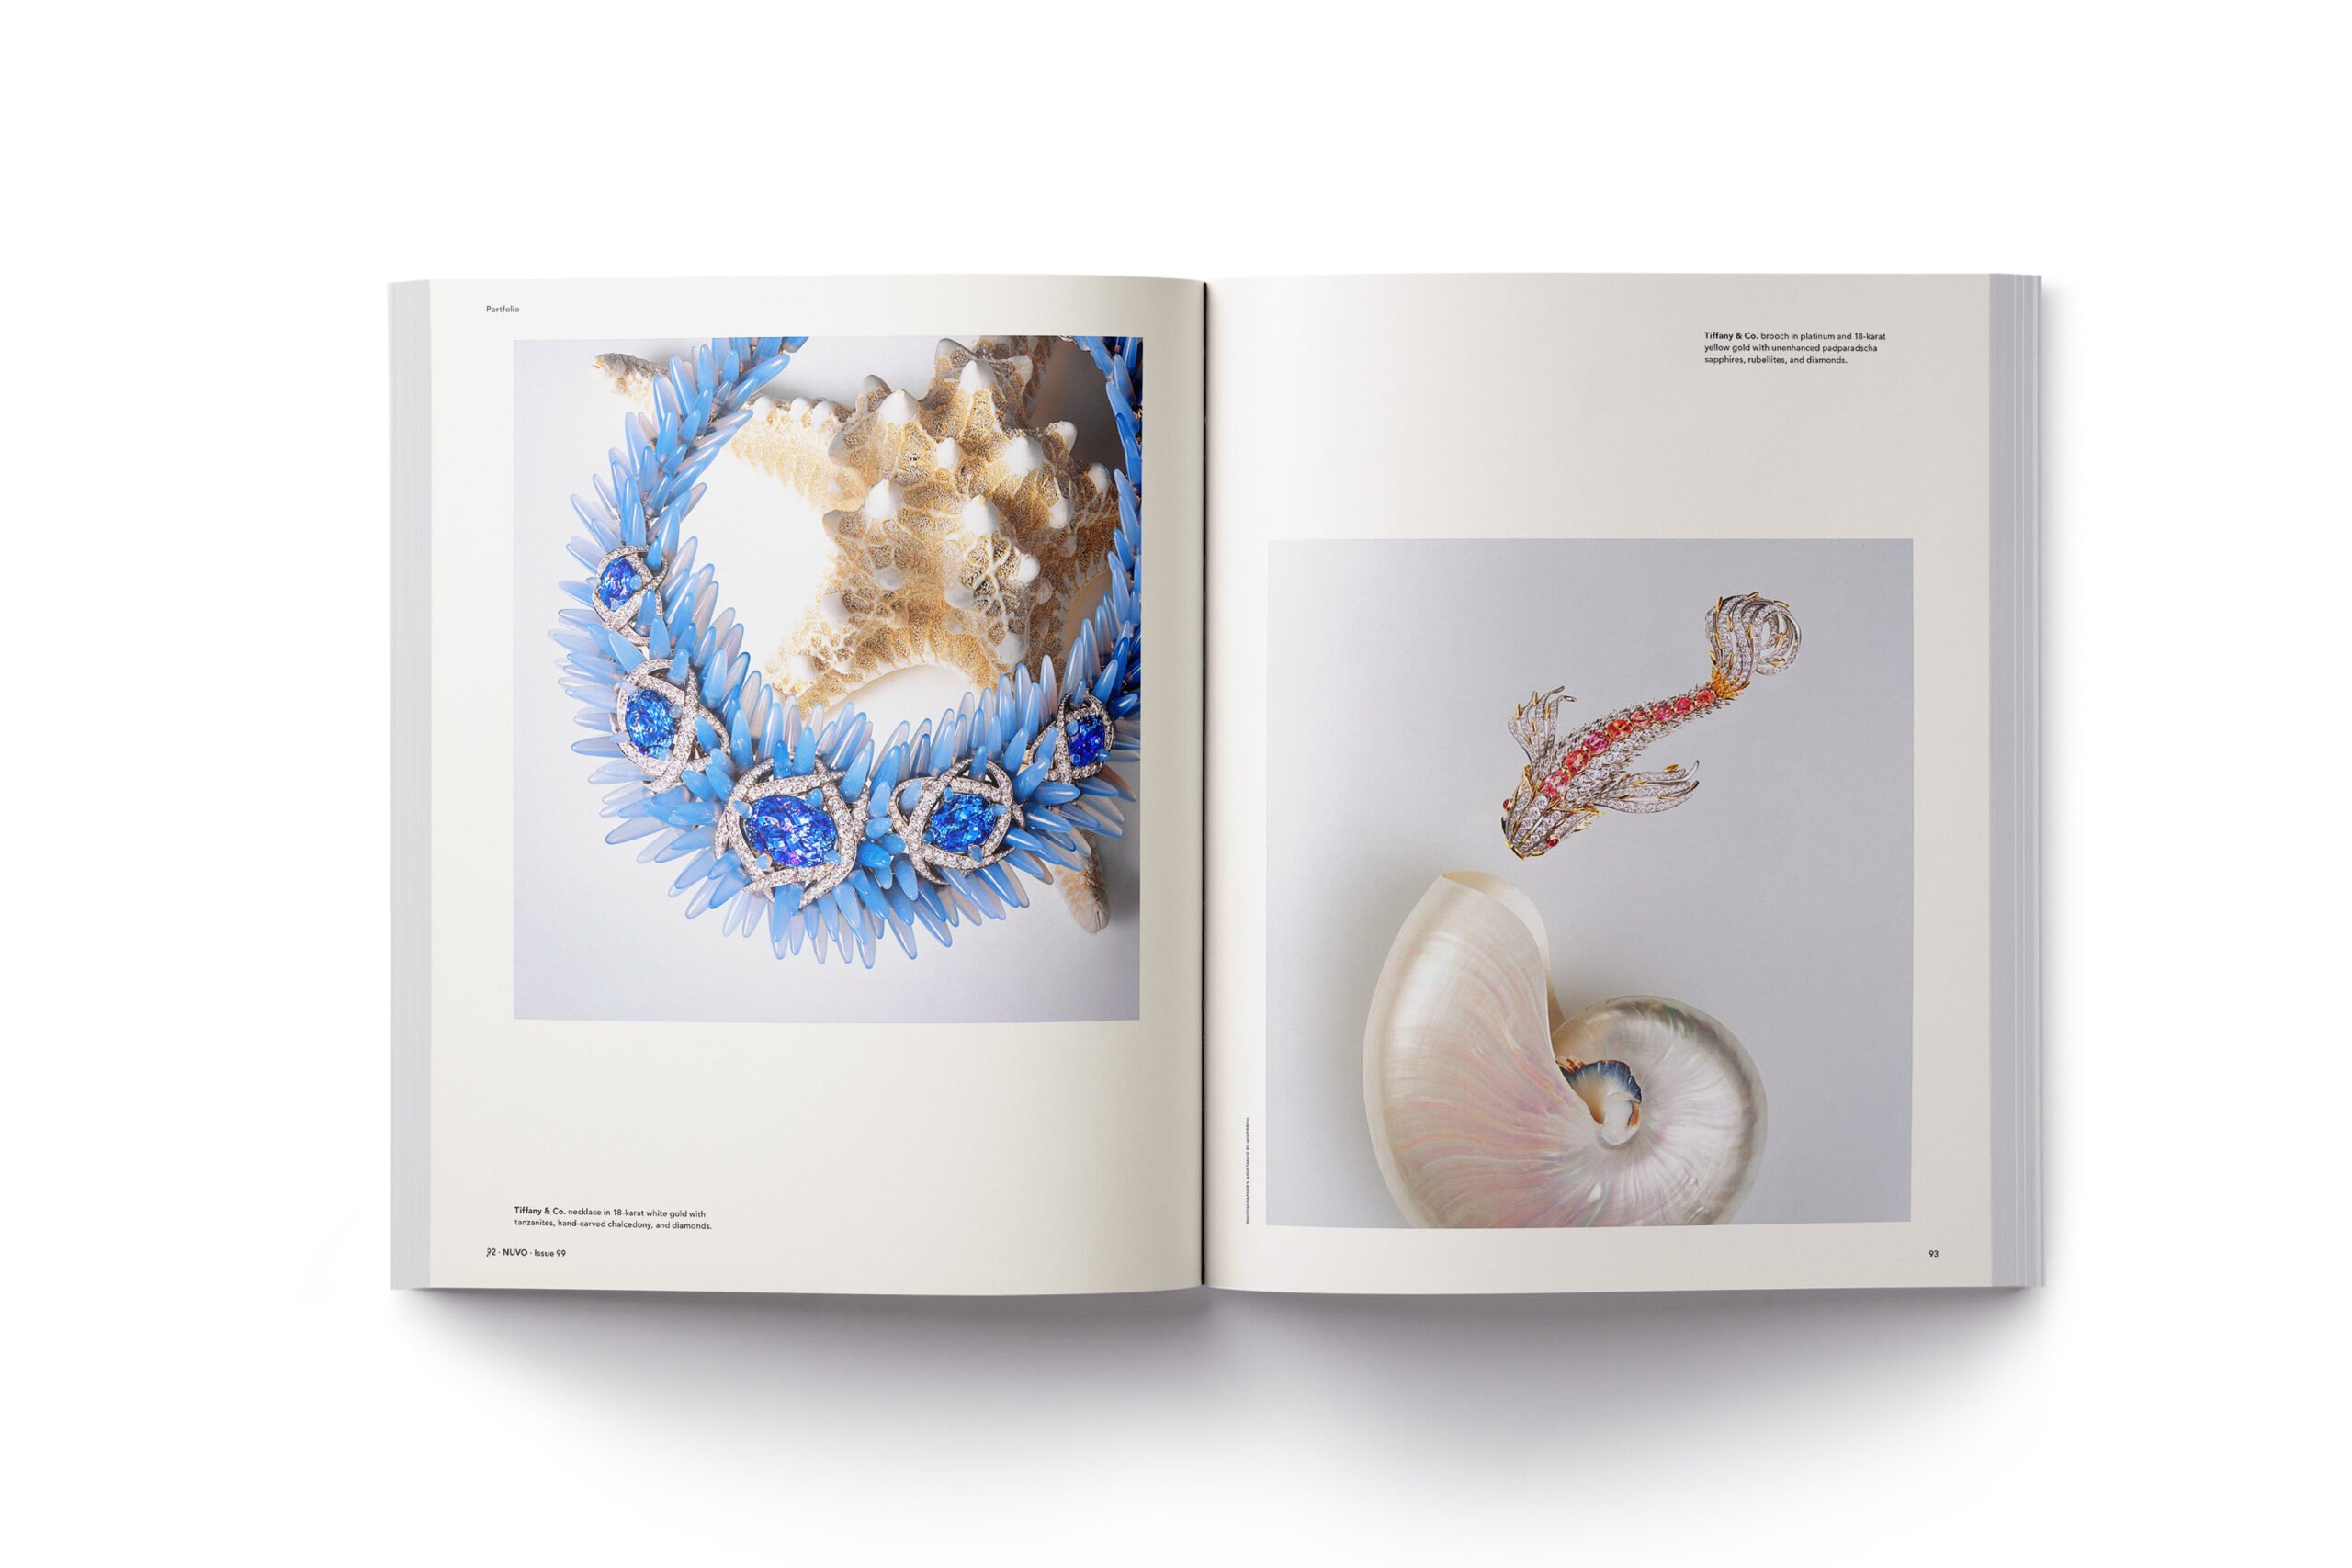 Tiffany & Co.’s Oceanic Blue Book Collection